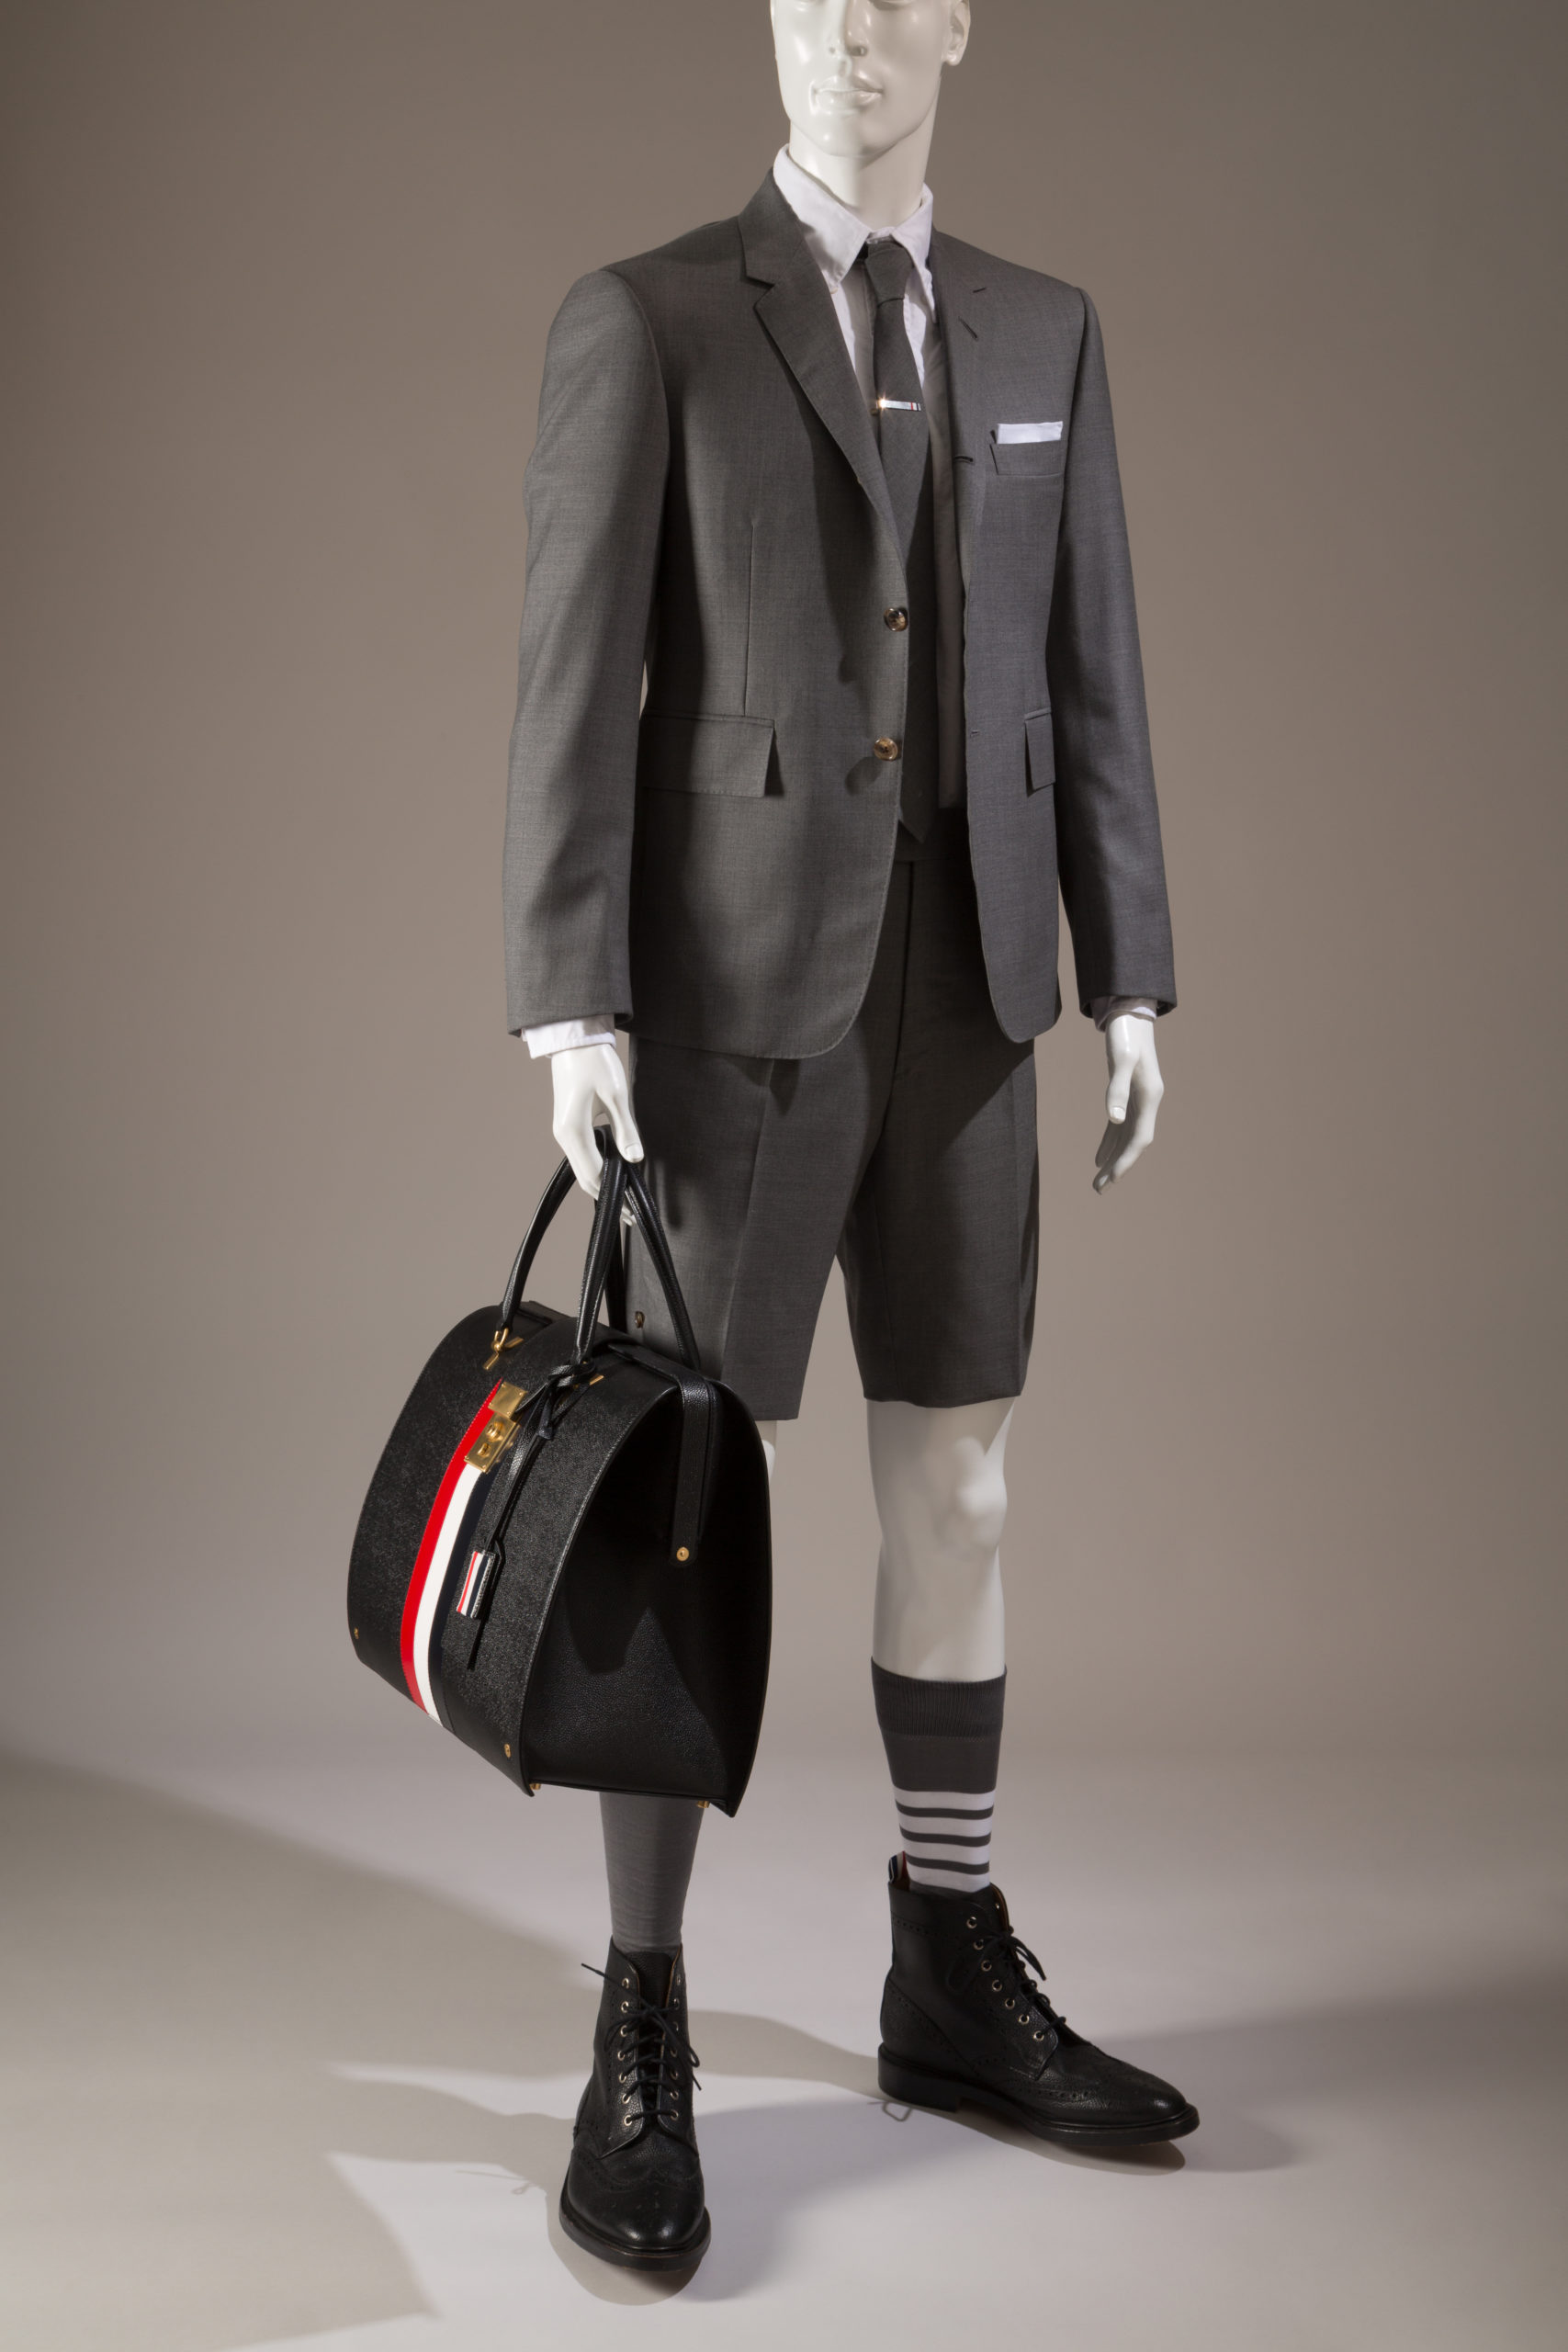 Thom Browne, man’s suit and bag, as worn by LeBron James during the 2018 NBA playoffs, Gift of Thom Browne.